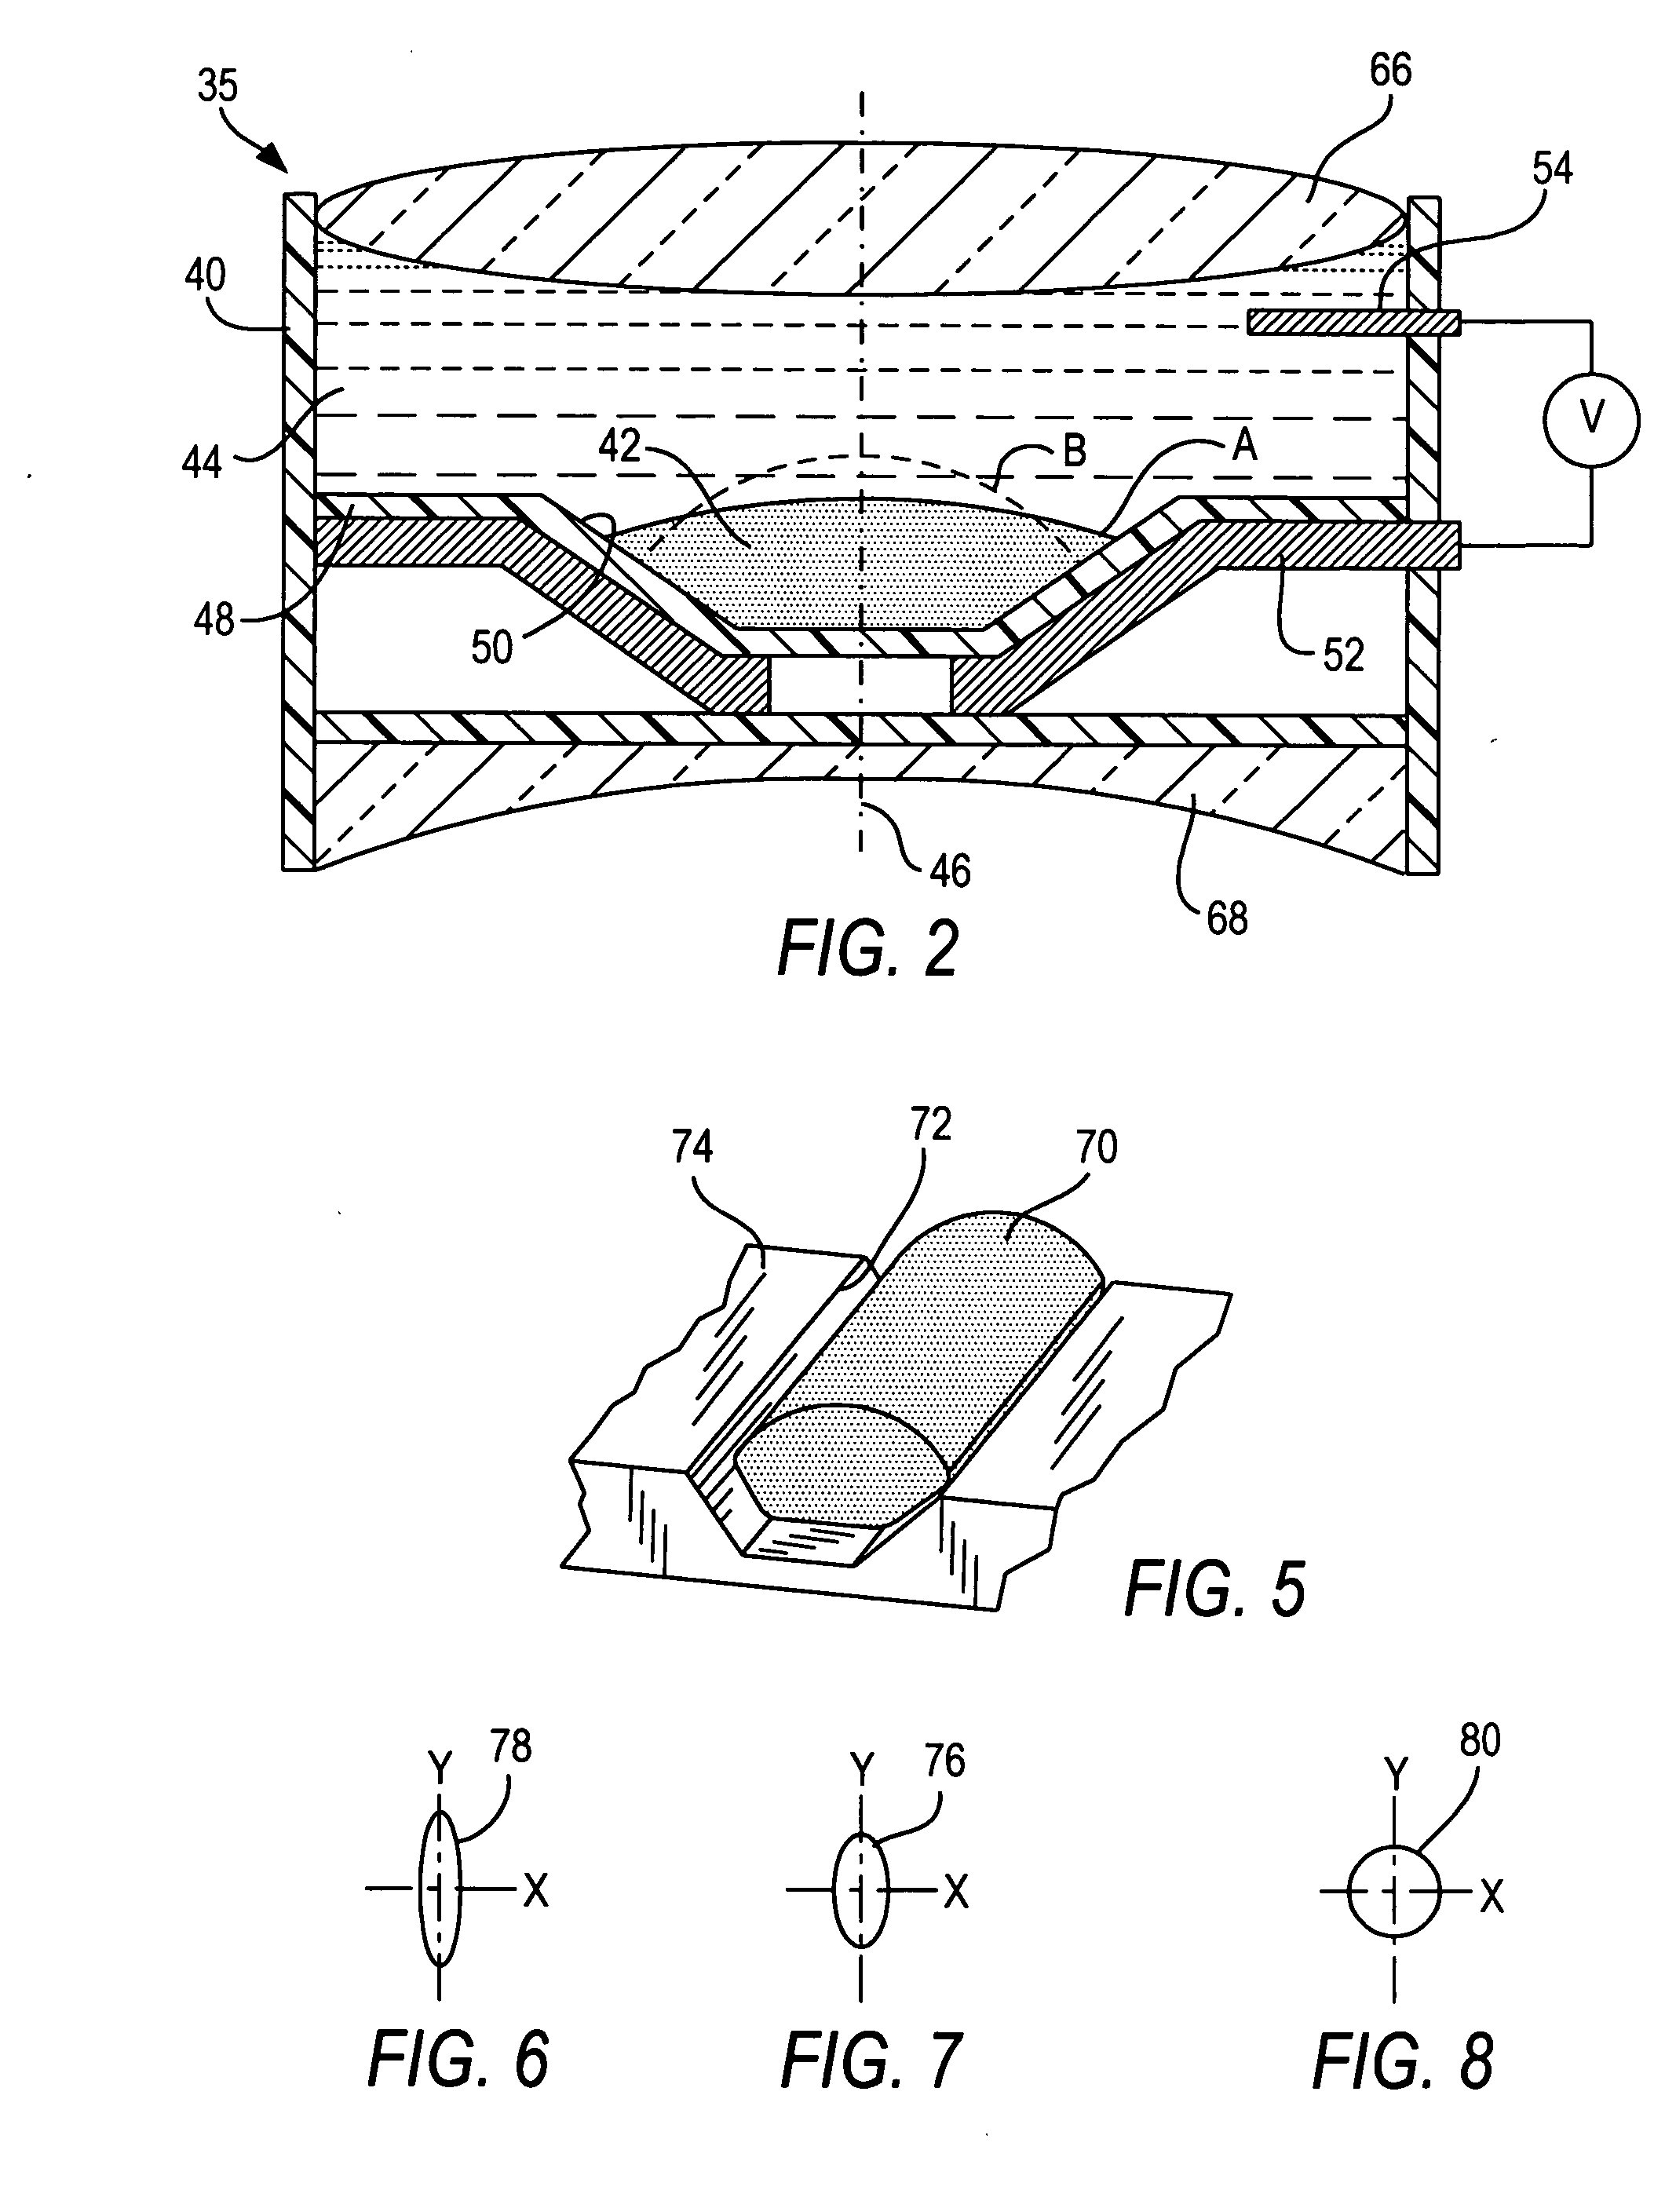 Optical adjustment for increased working range and performance in electro-optical readers